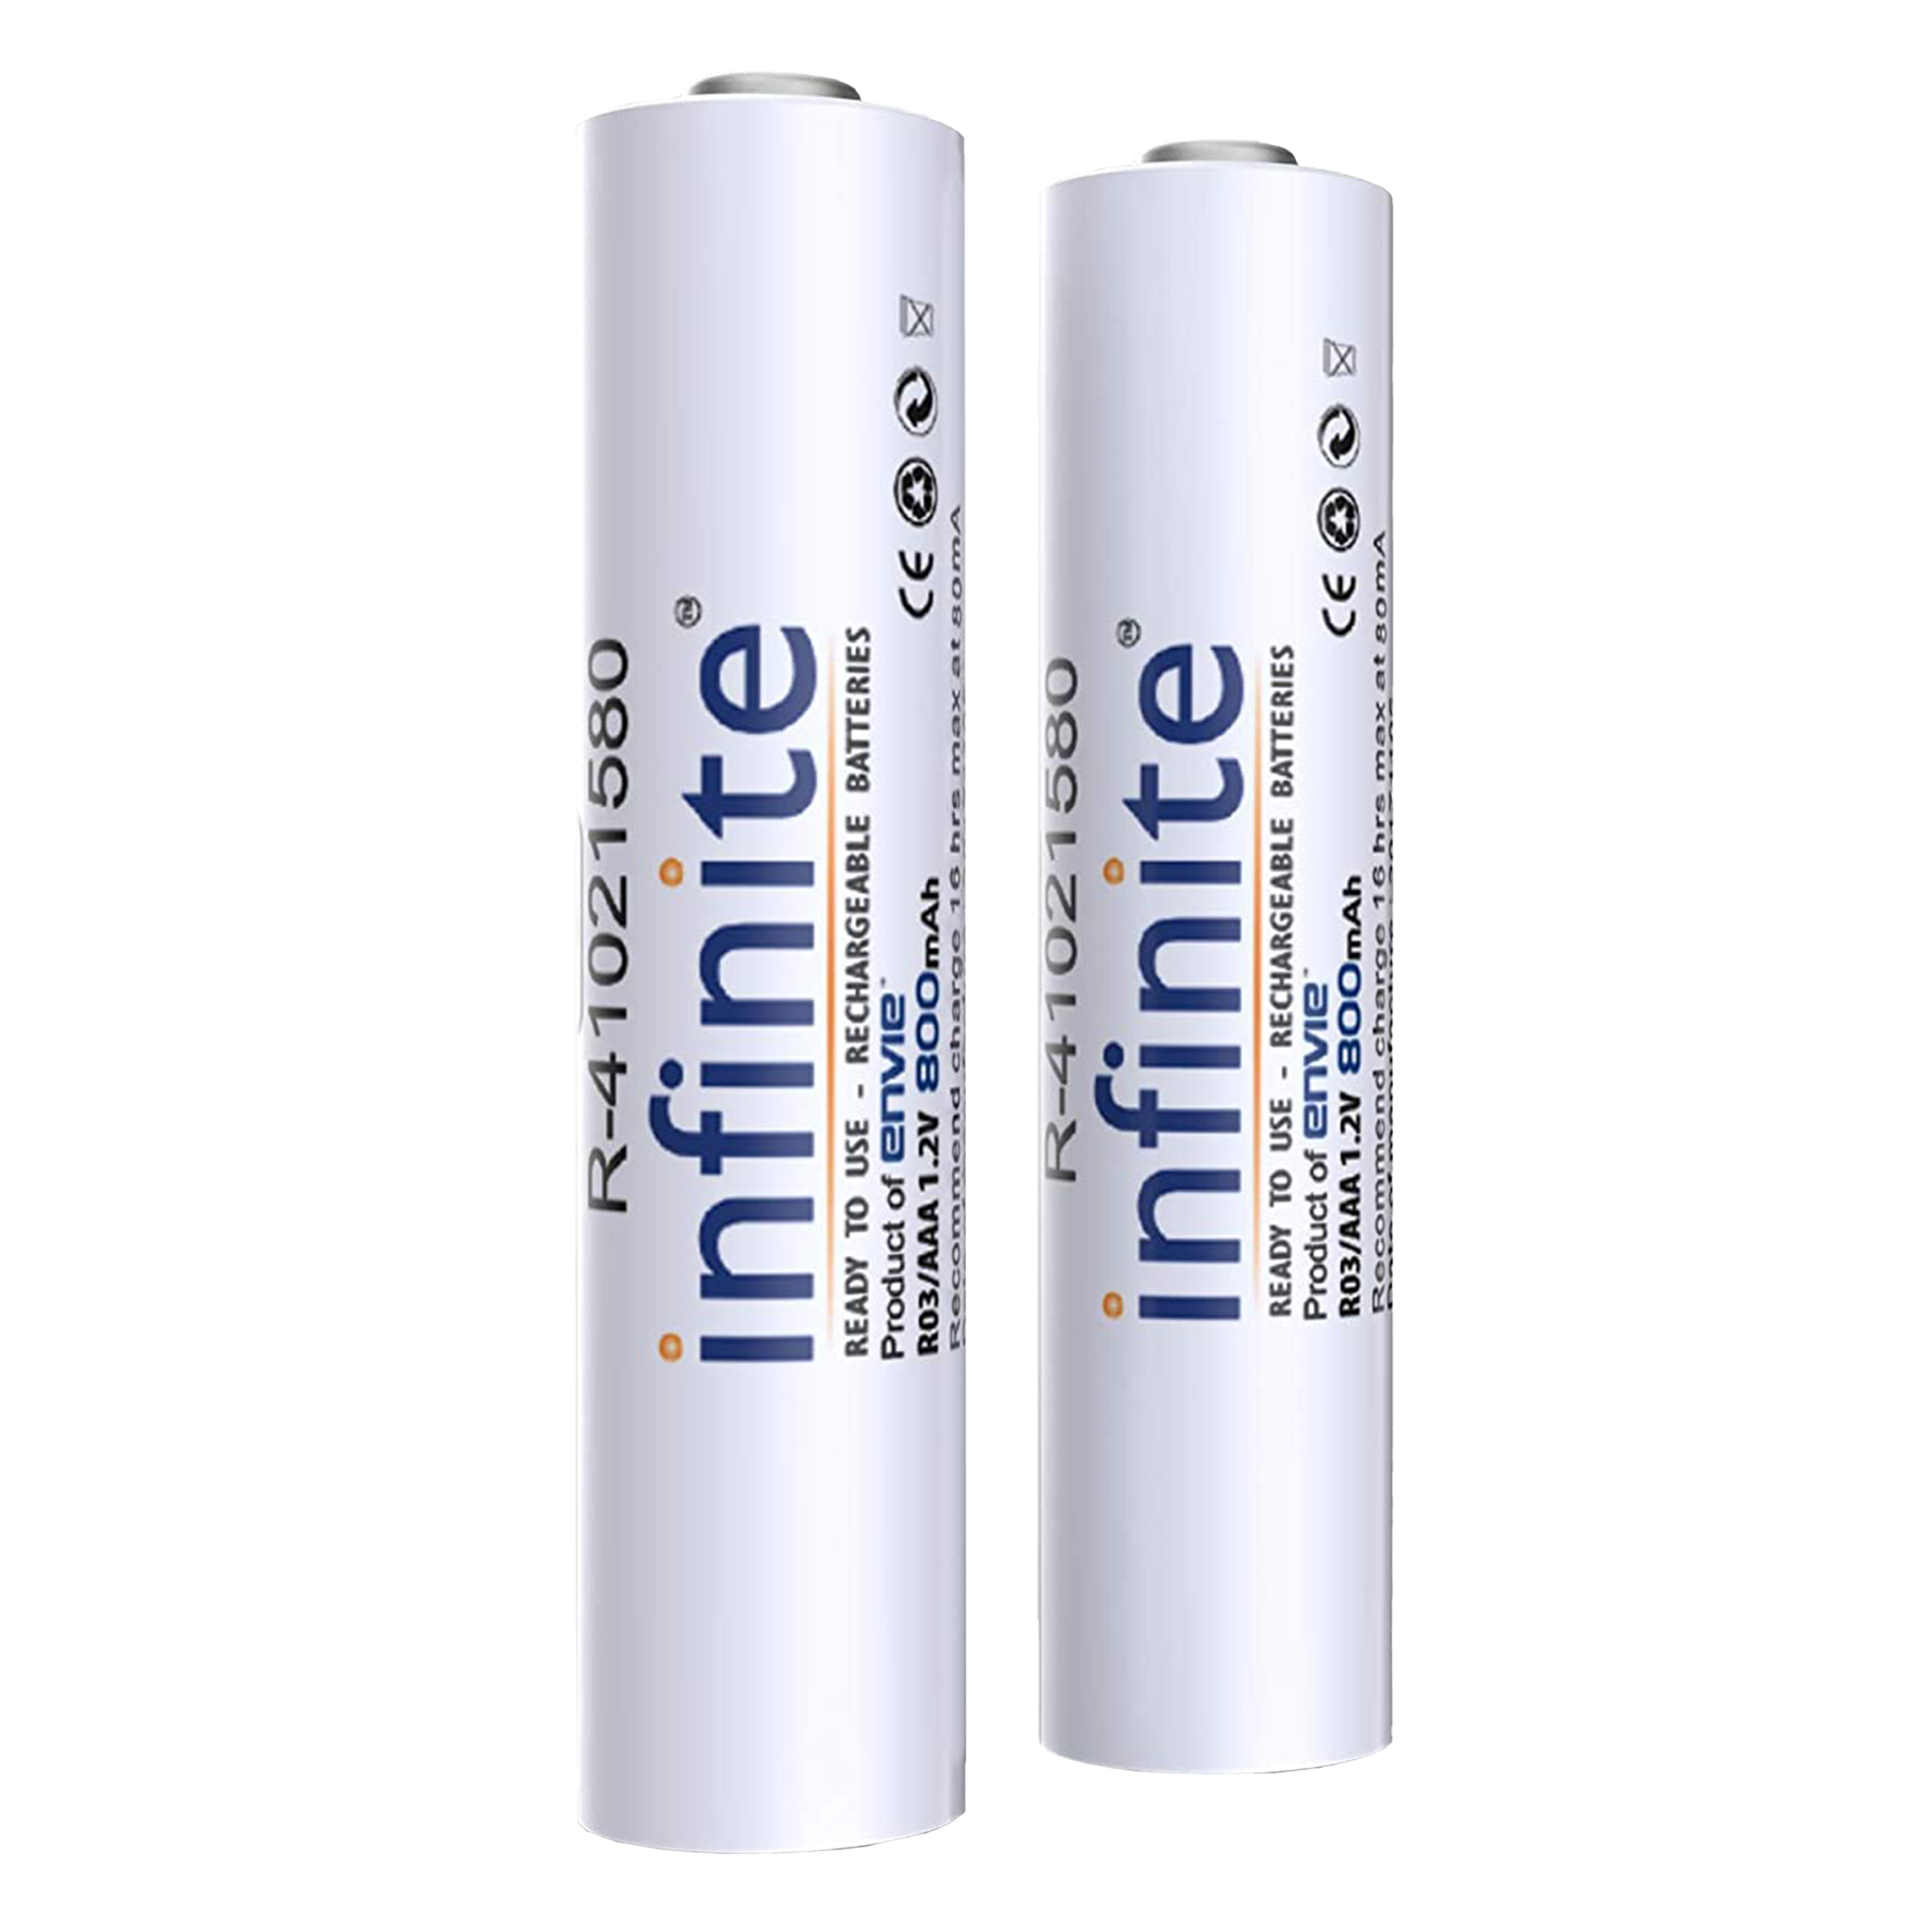 envie Infinite 800 mAh Ni-MH AAA Rechargeable Battery (Pack of 2)